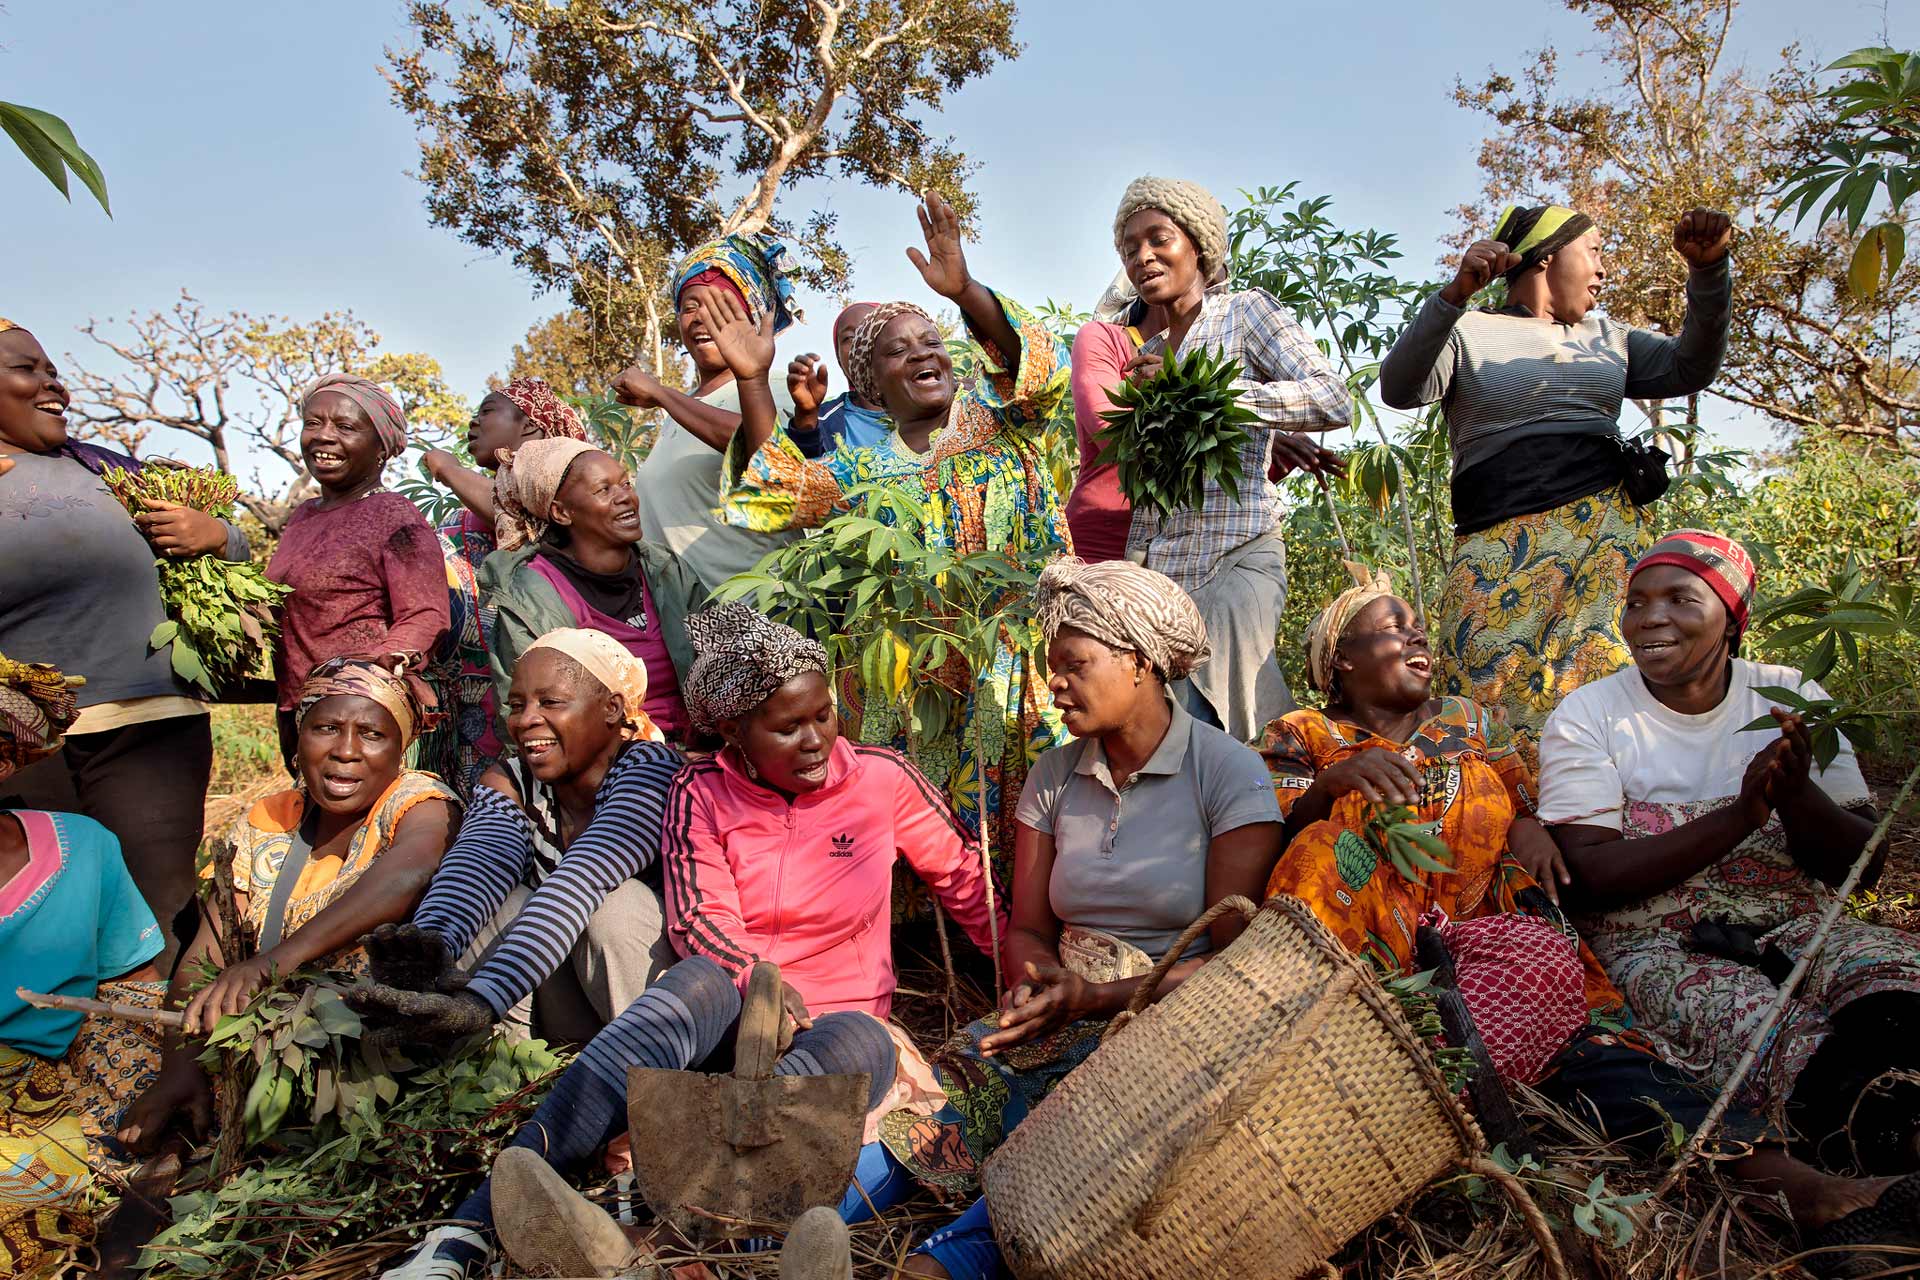 A women’s cooperative formed in the township of Yoko, Cameroon. It’s called SOCCOMAD and has 42 members, including four men, who joined as allies.